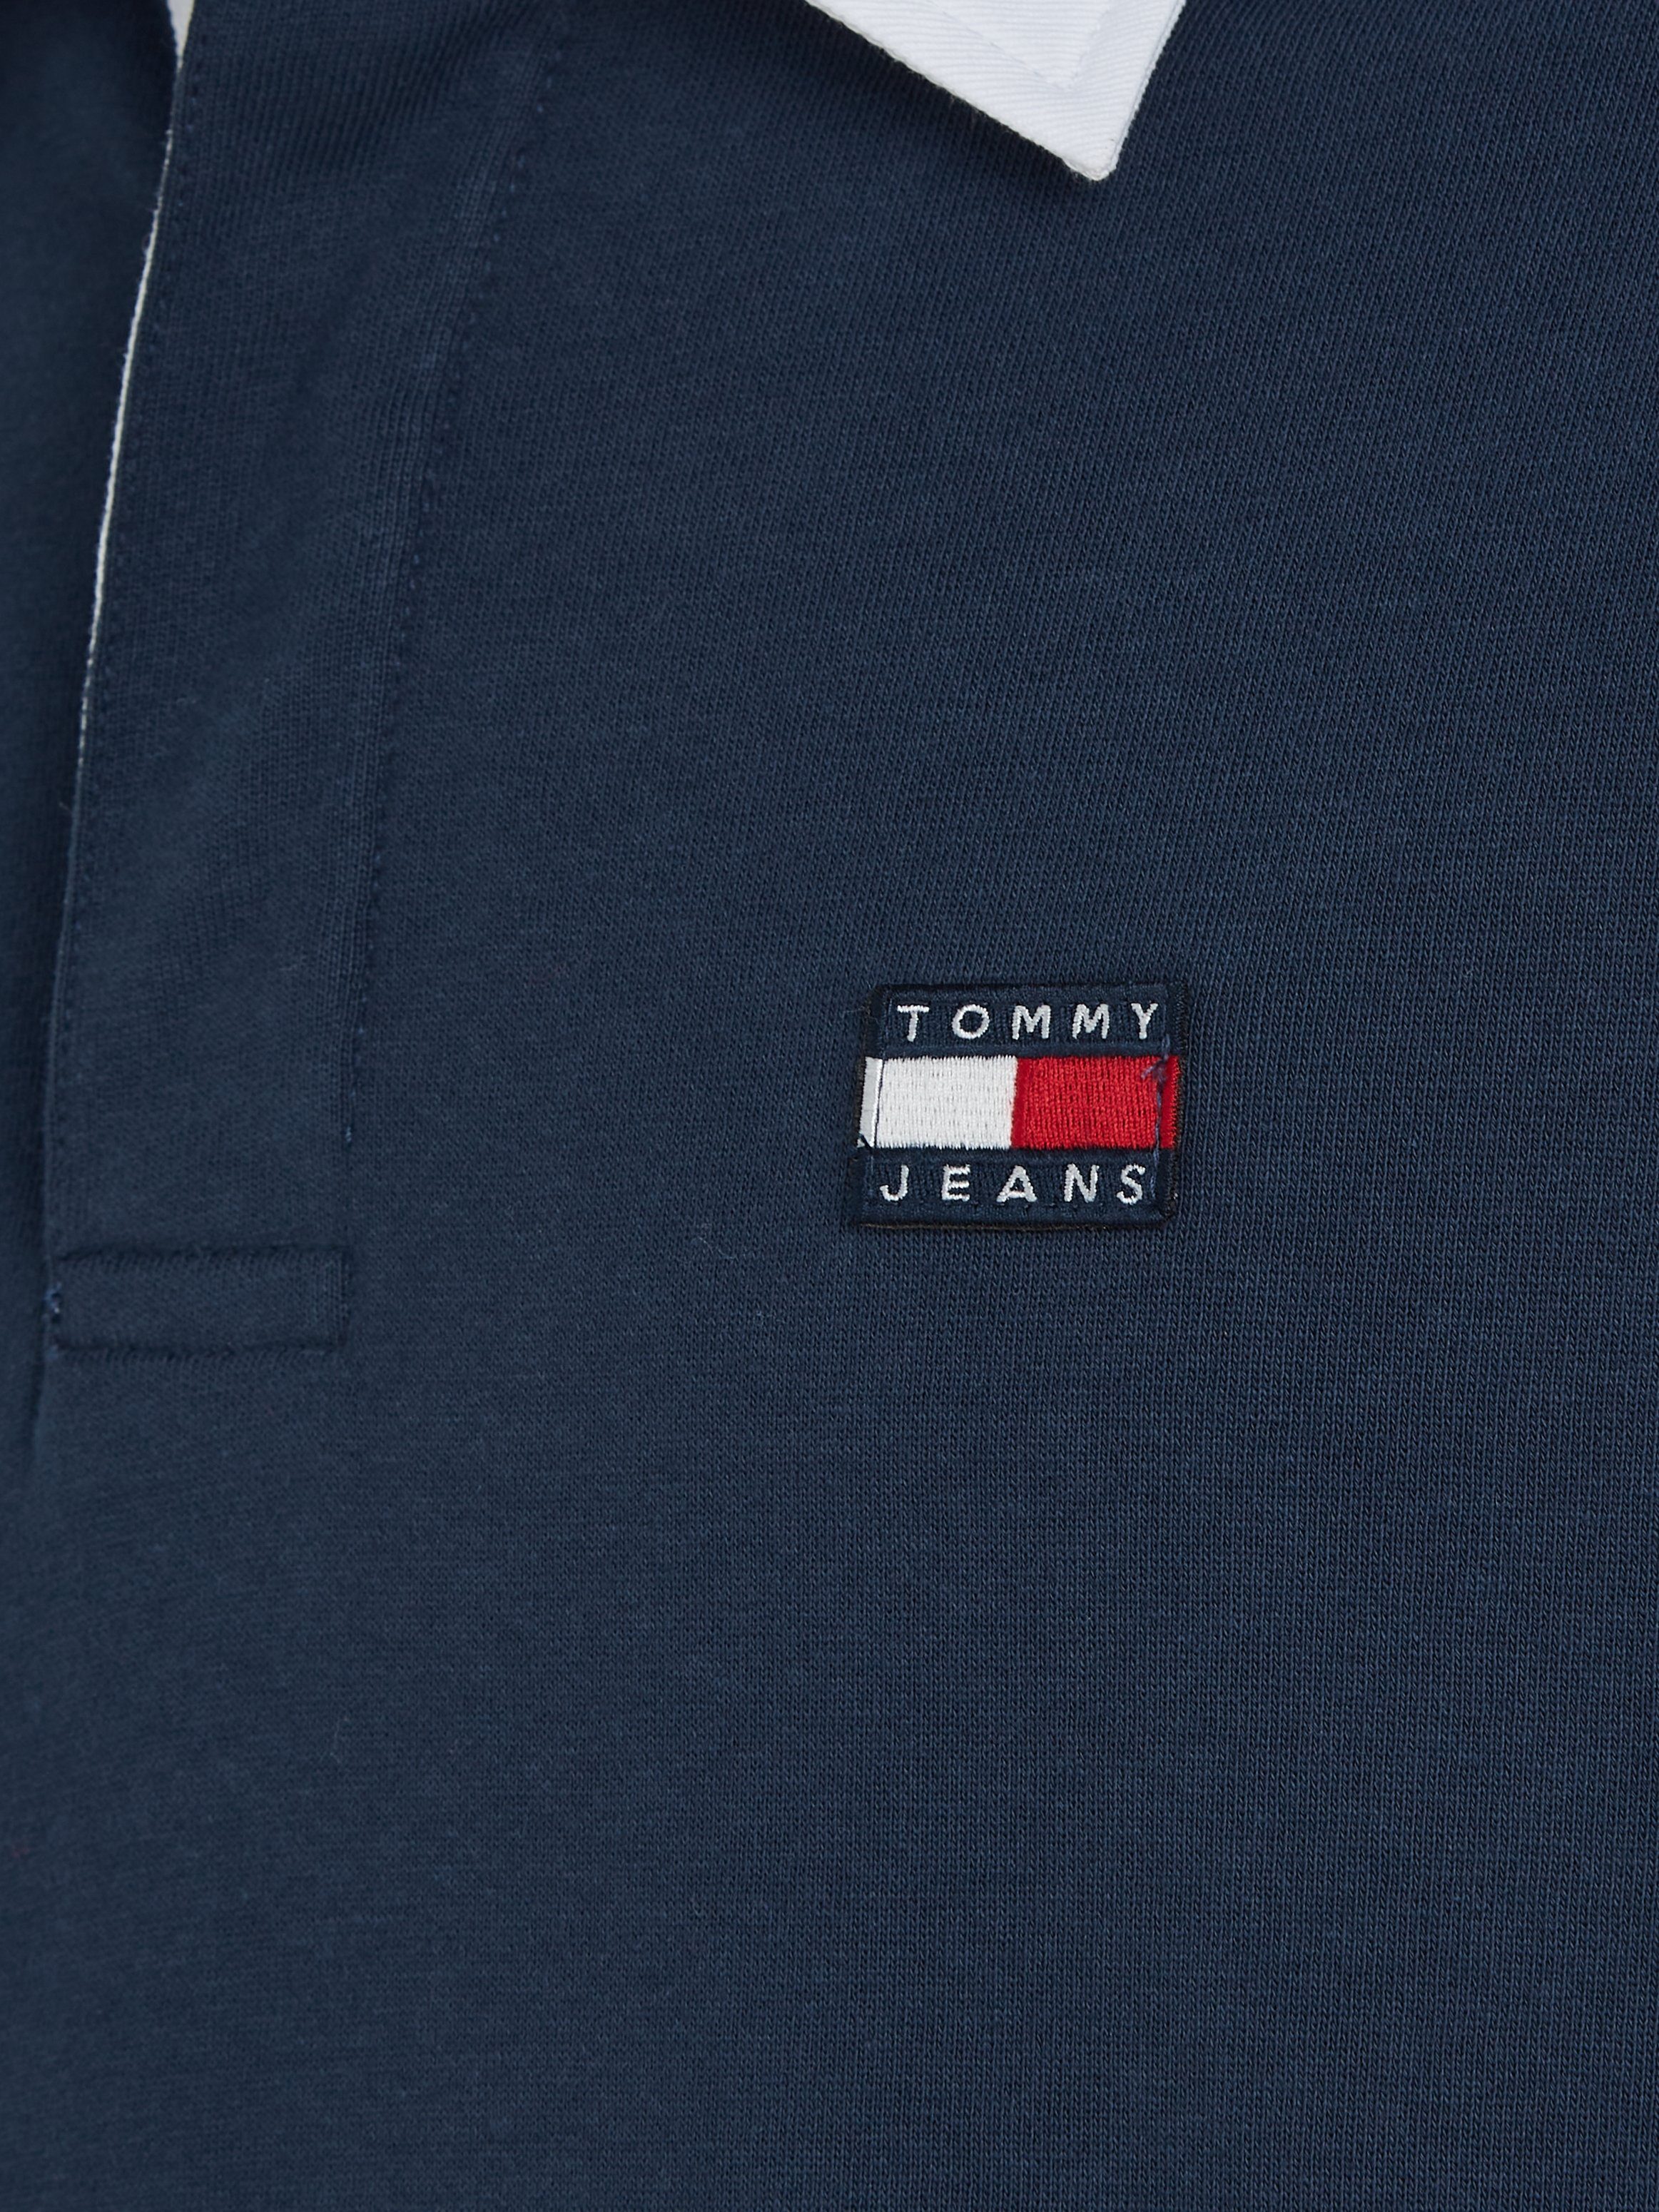 Navy RUGBY Tommy TJM Jeans Langarm-Poloshirt BADGE Twilight